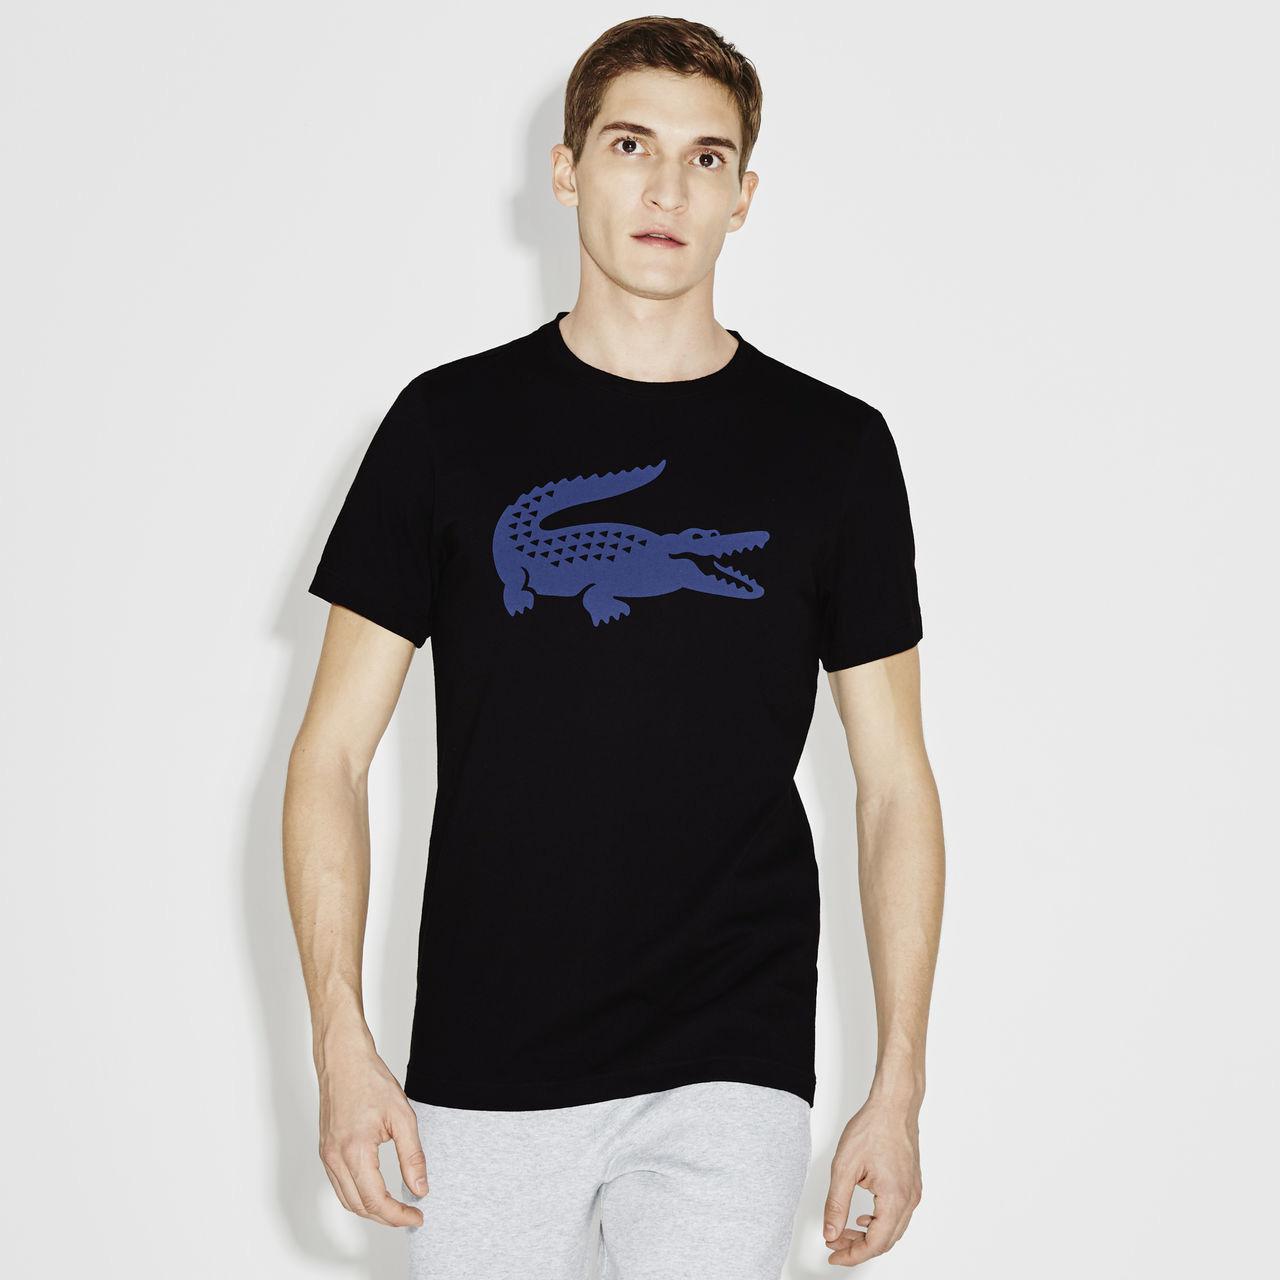 Funny Lacoste Shirts